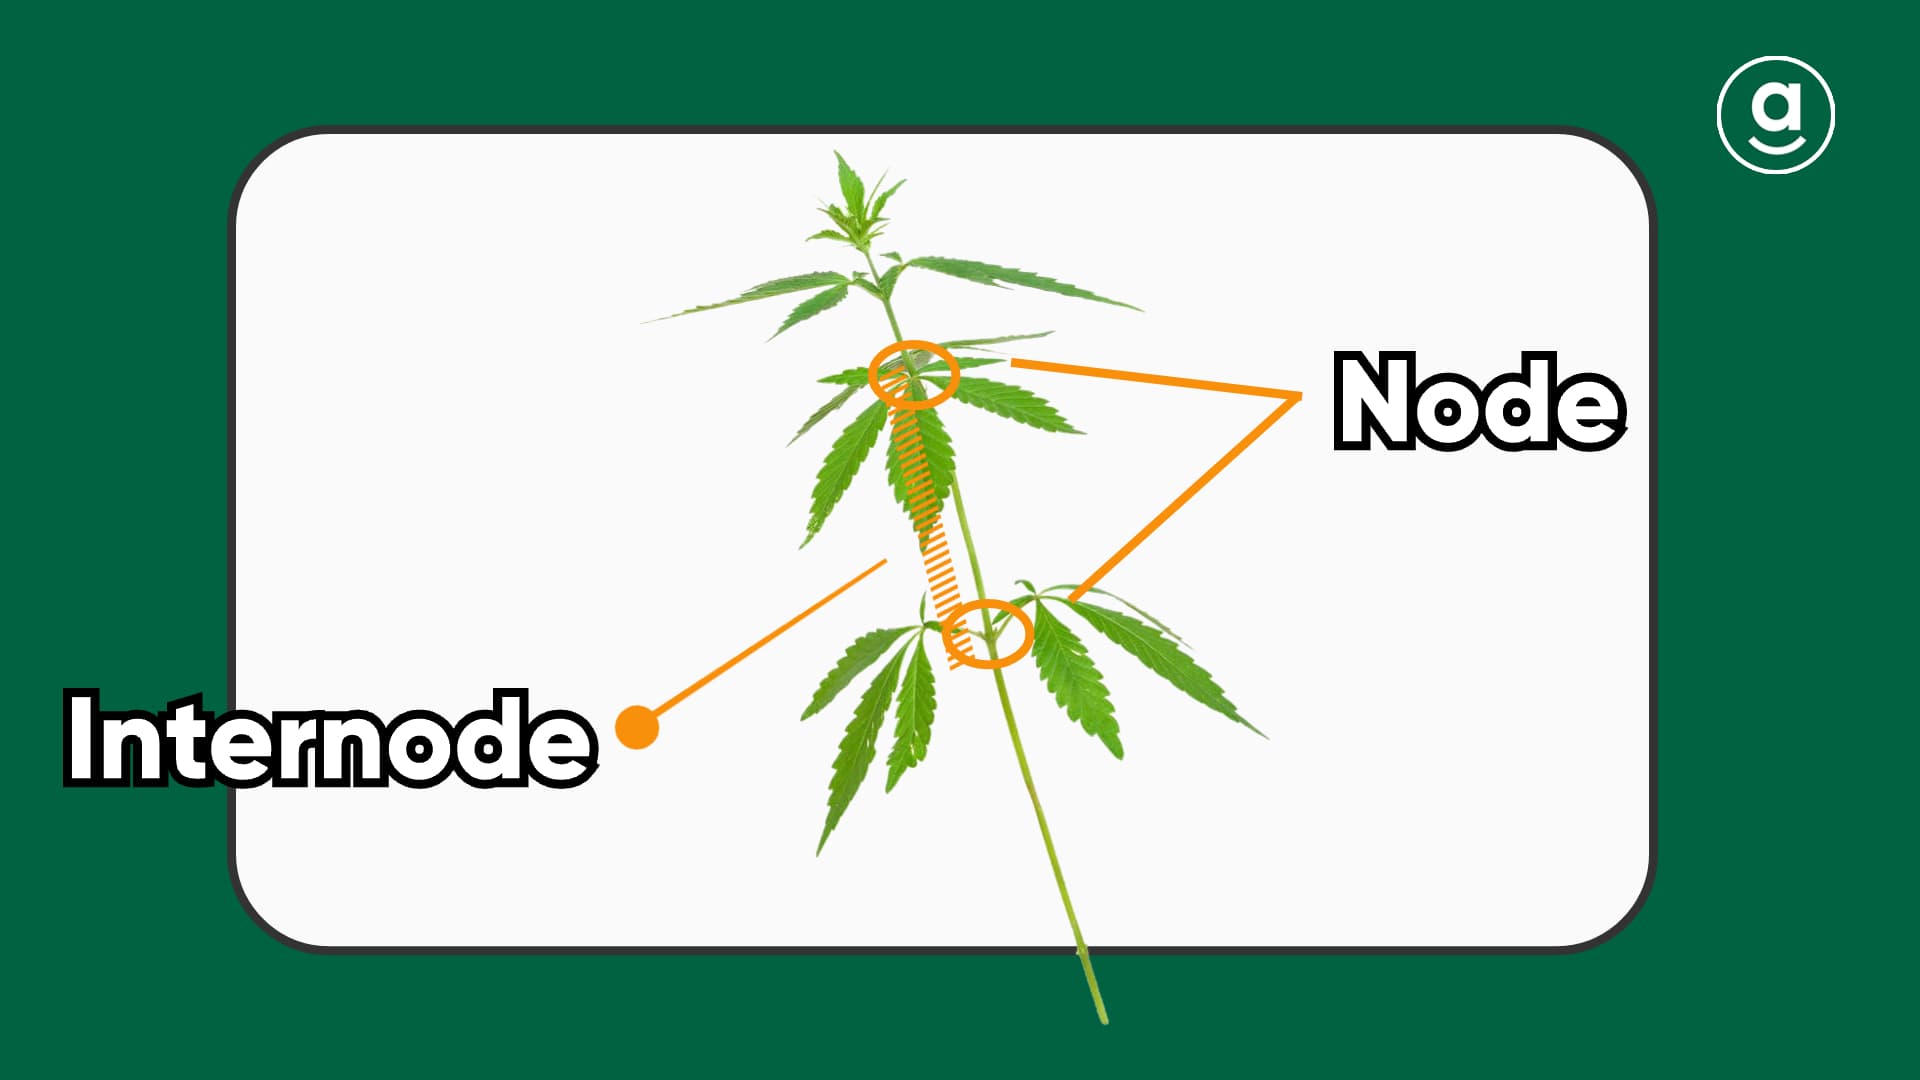 nodes and internodes of weed plants